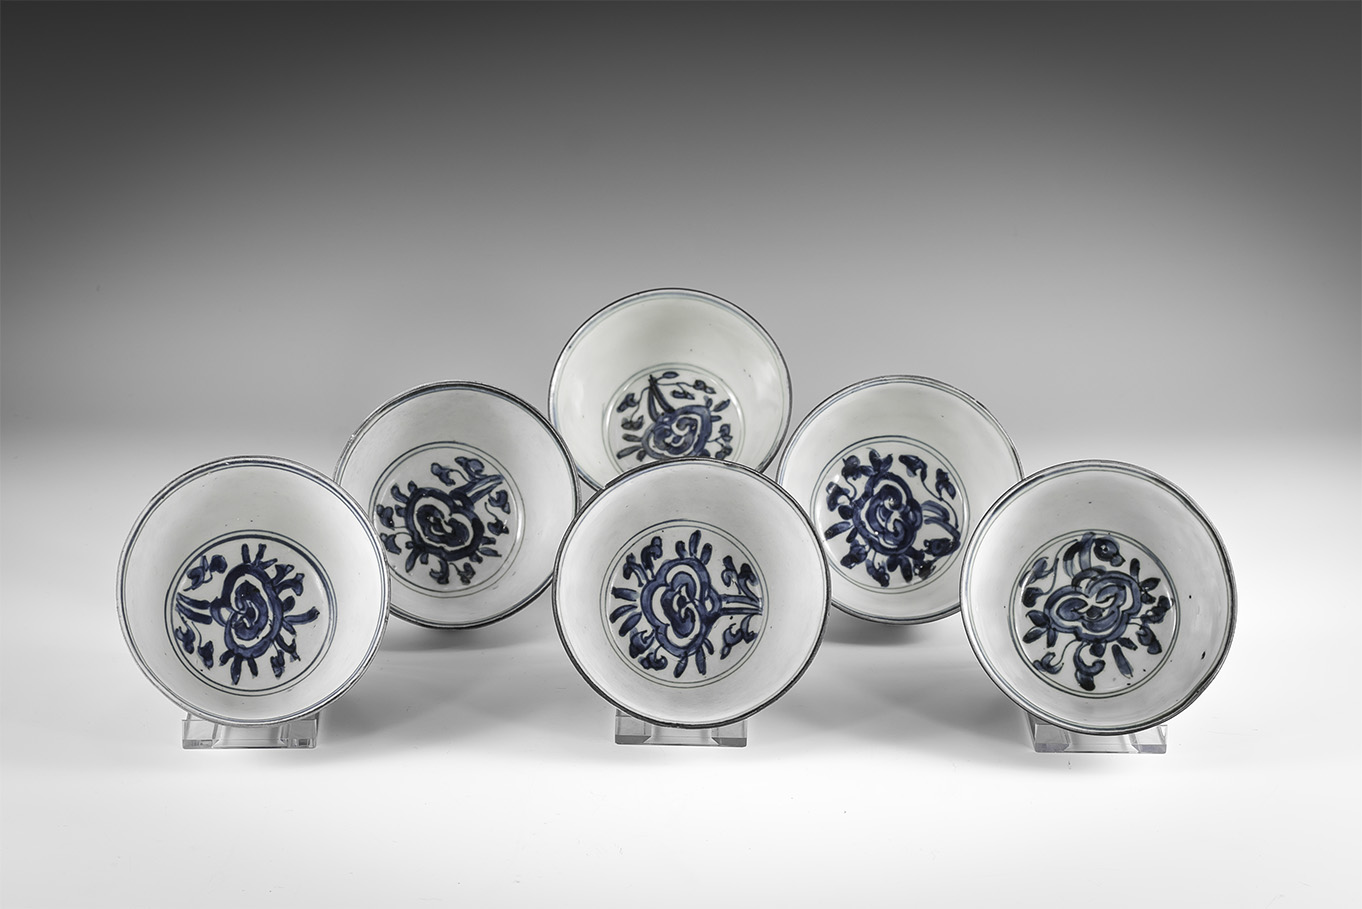 Chinese Blue and White Export Ware Bowl Set